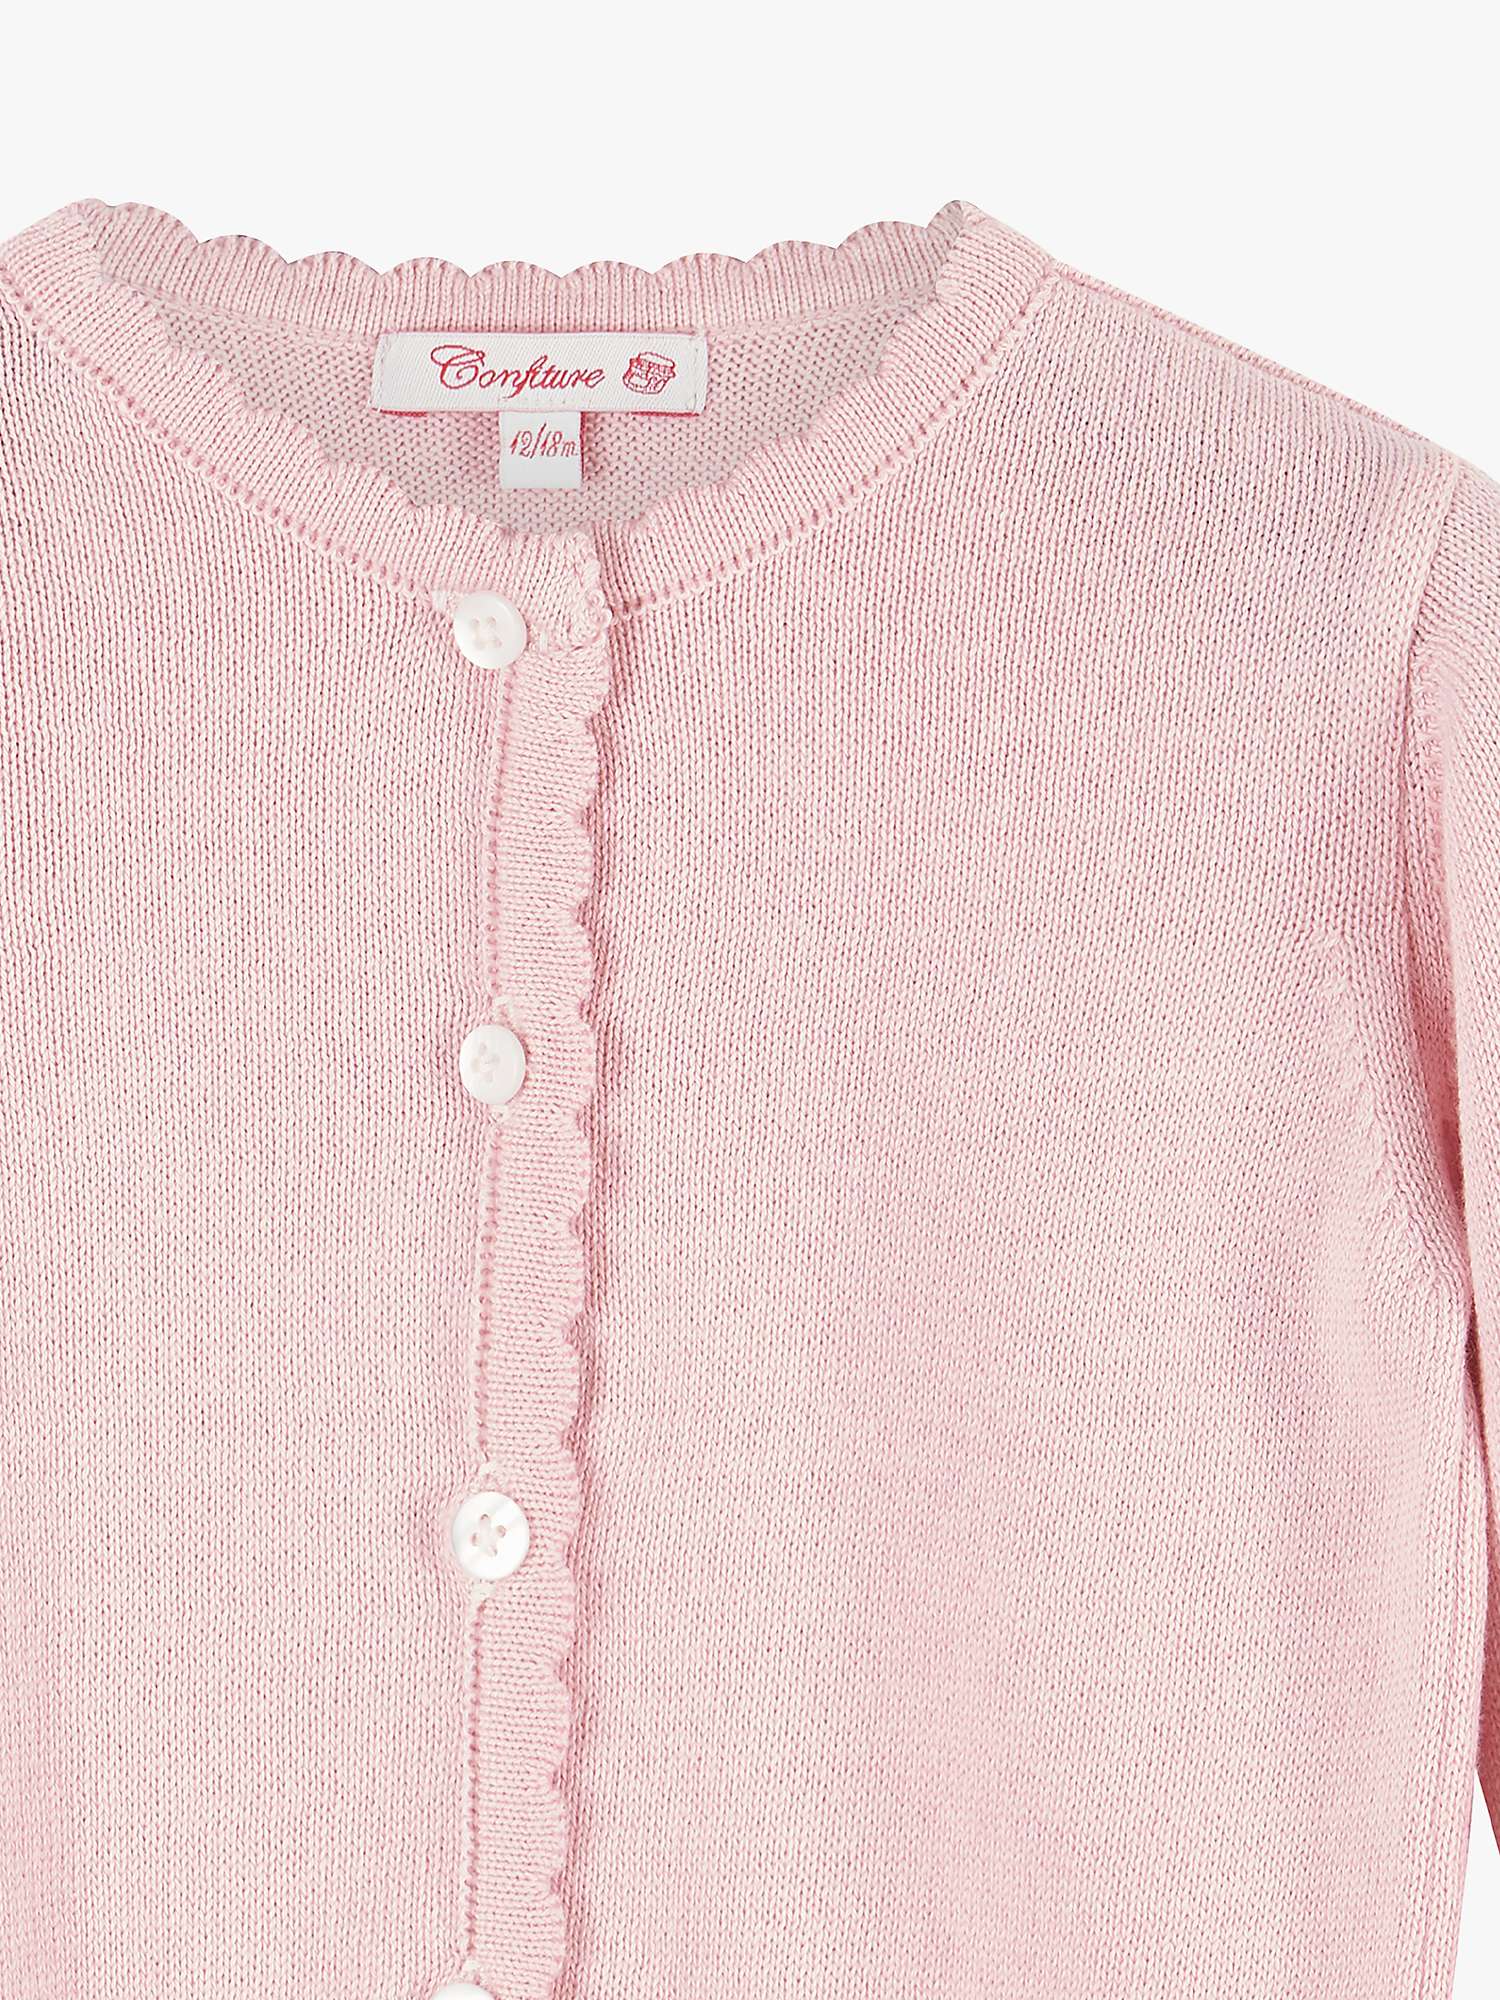 Buy Trotters Baby Scalloped Edge Cardigan Online at johnlewis.com